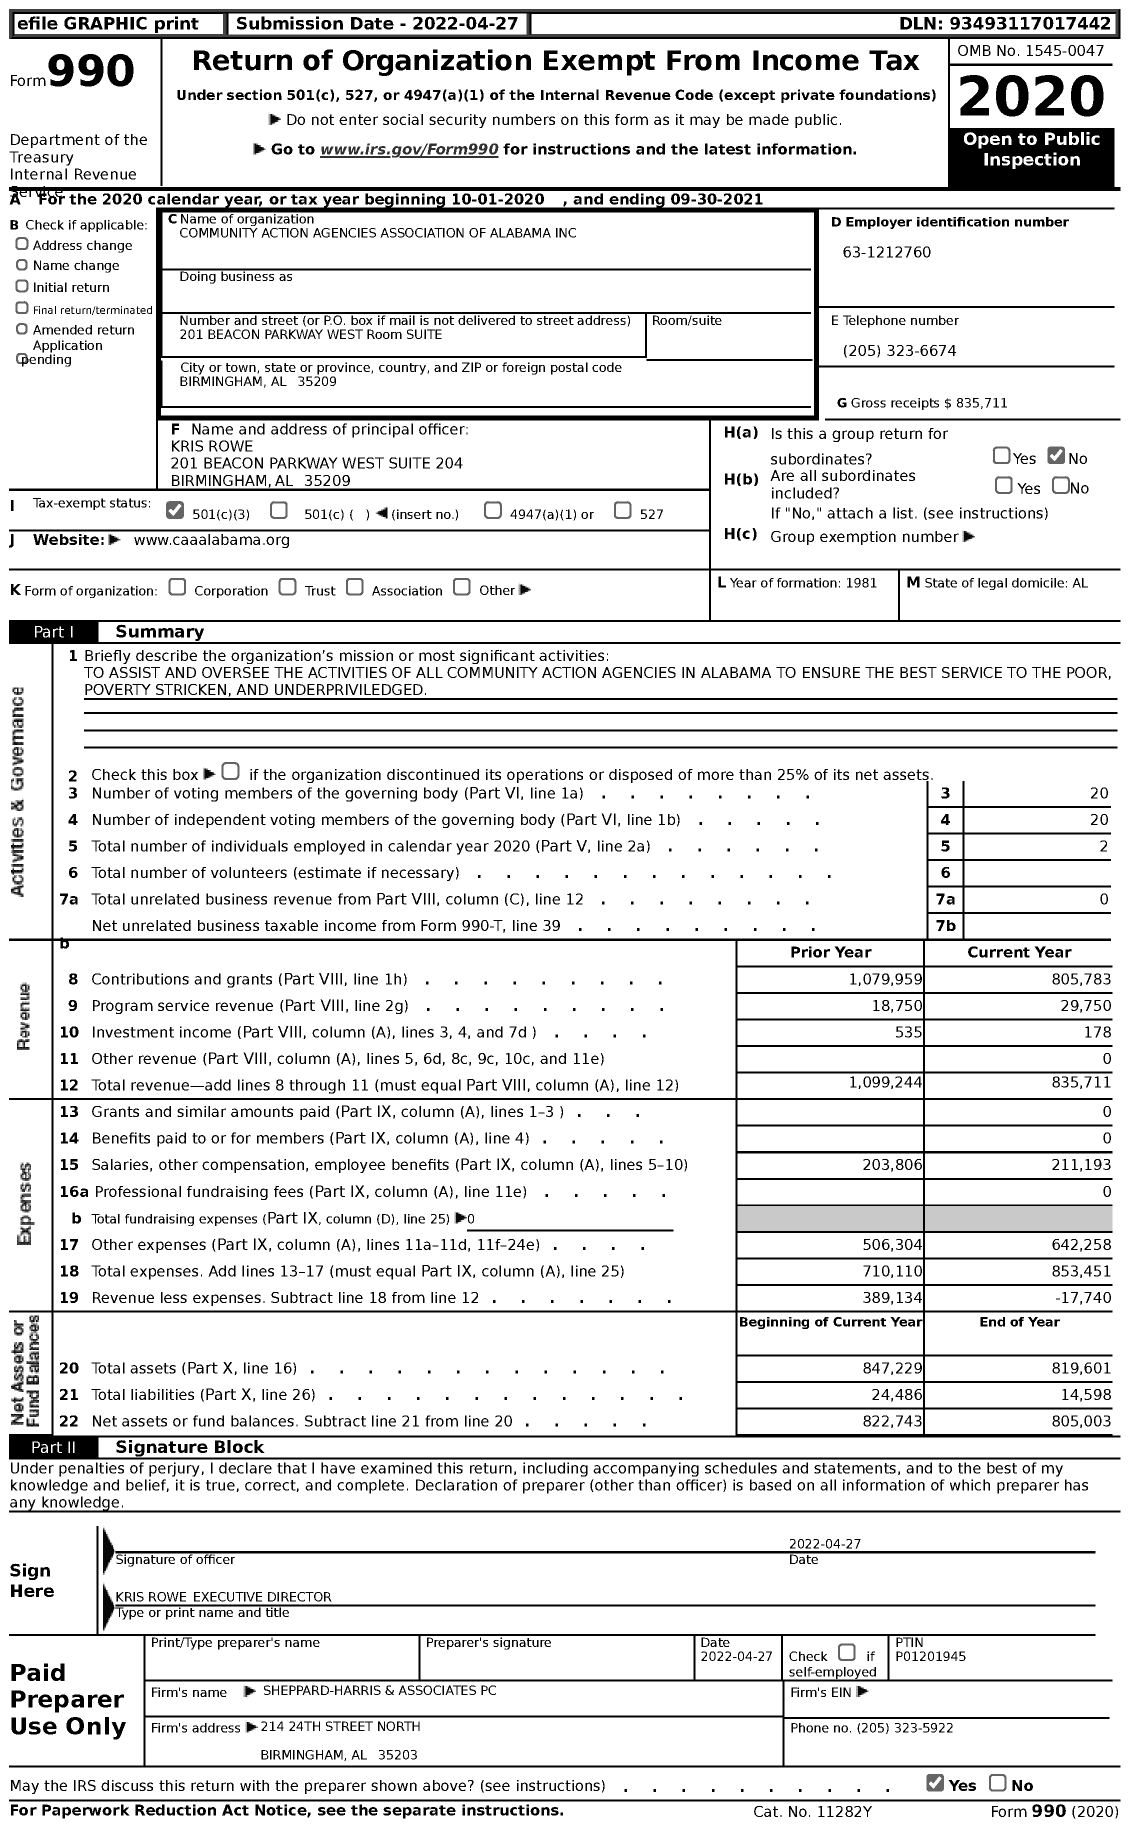 Image of first page of 2020 Form 990 for Community Action Agencies Association of Alabama